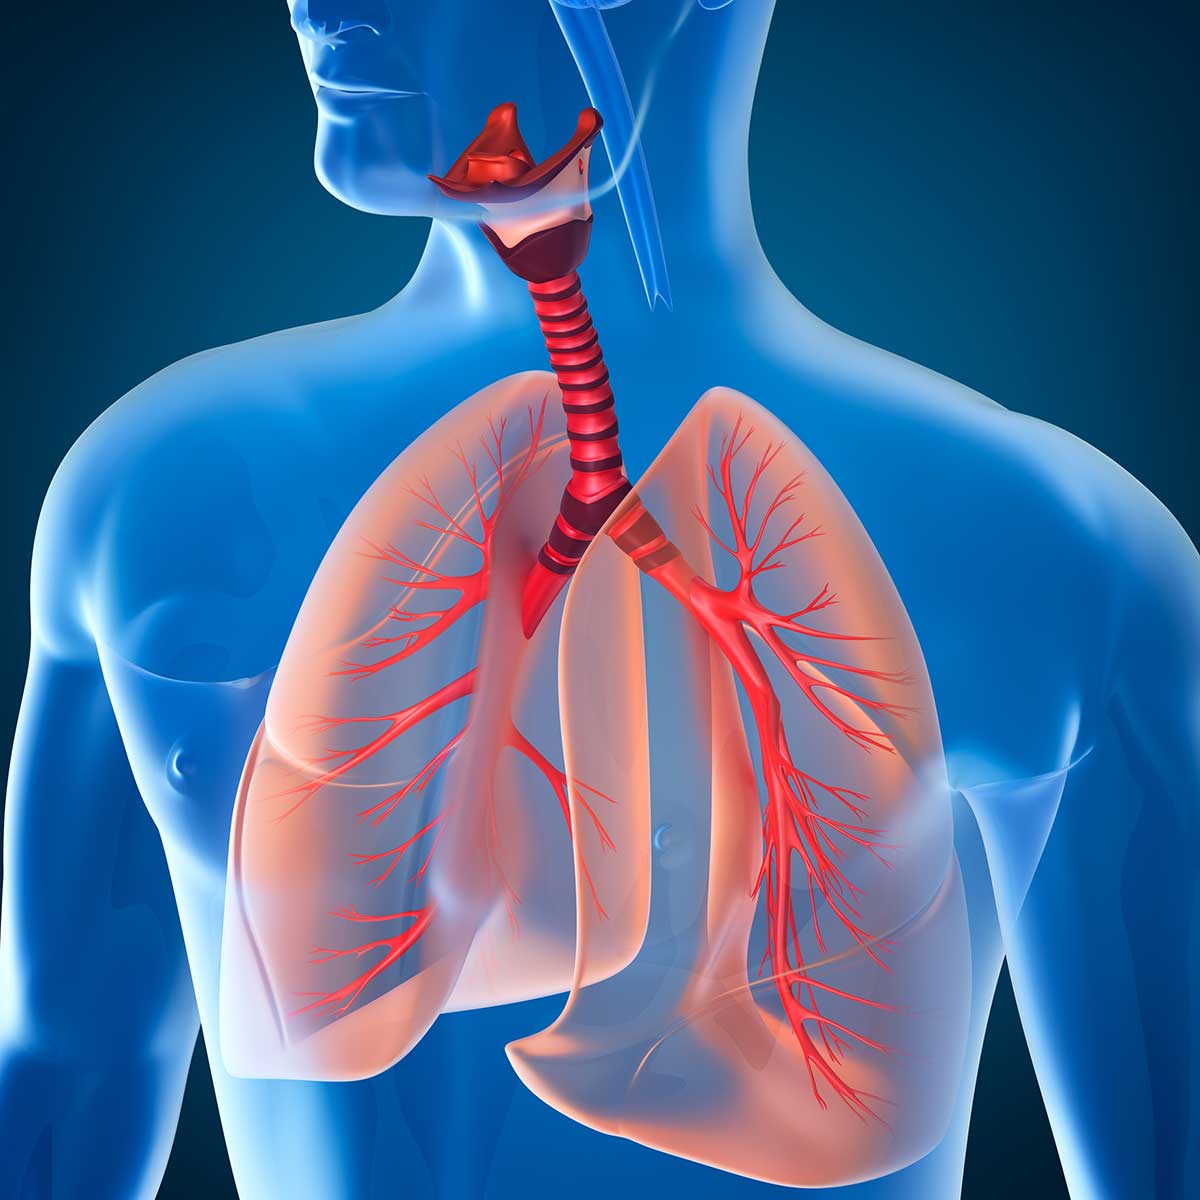 respiratory system disorders